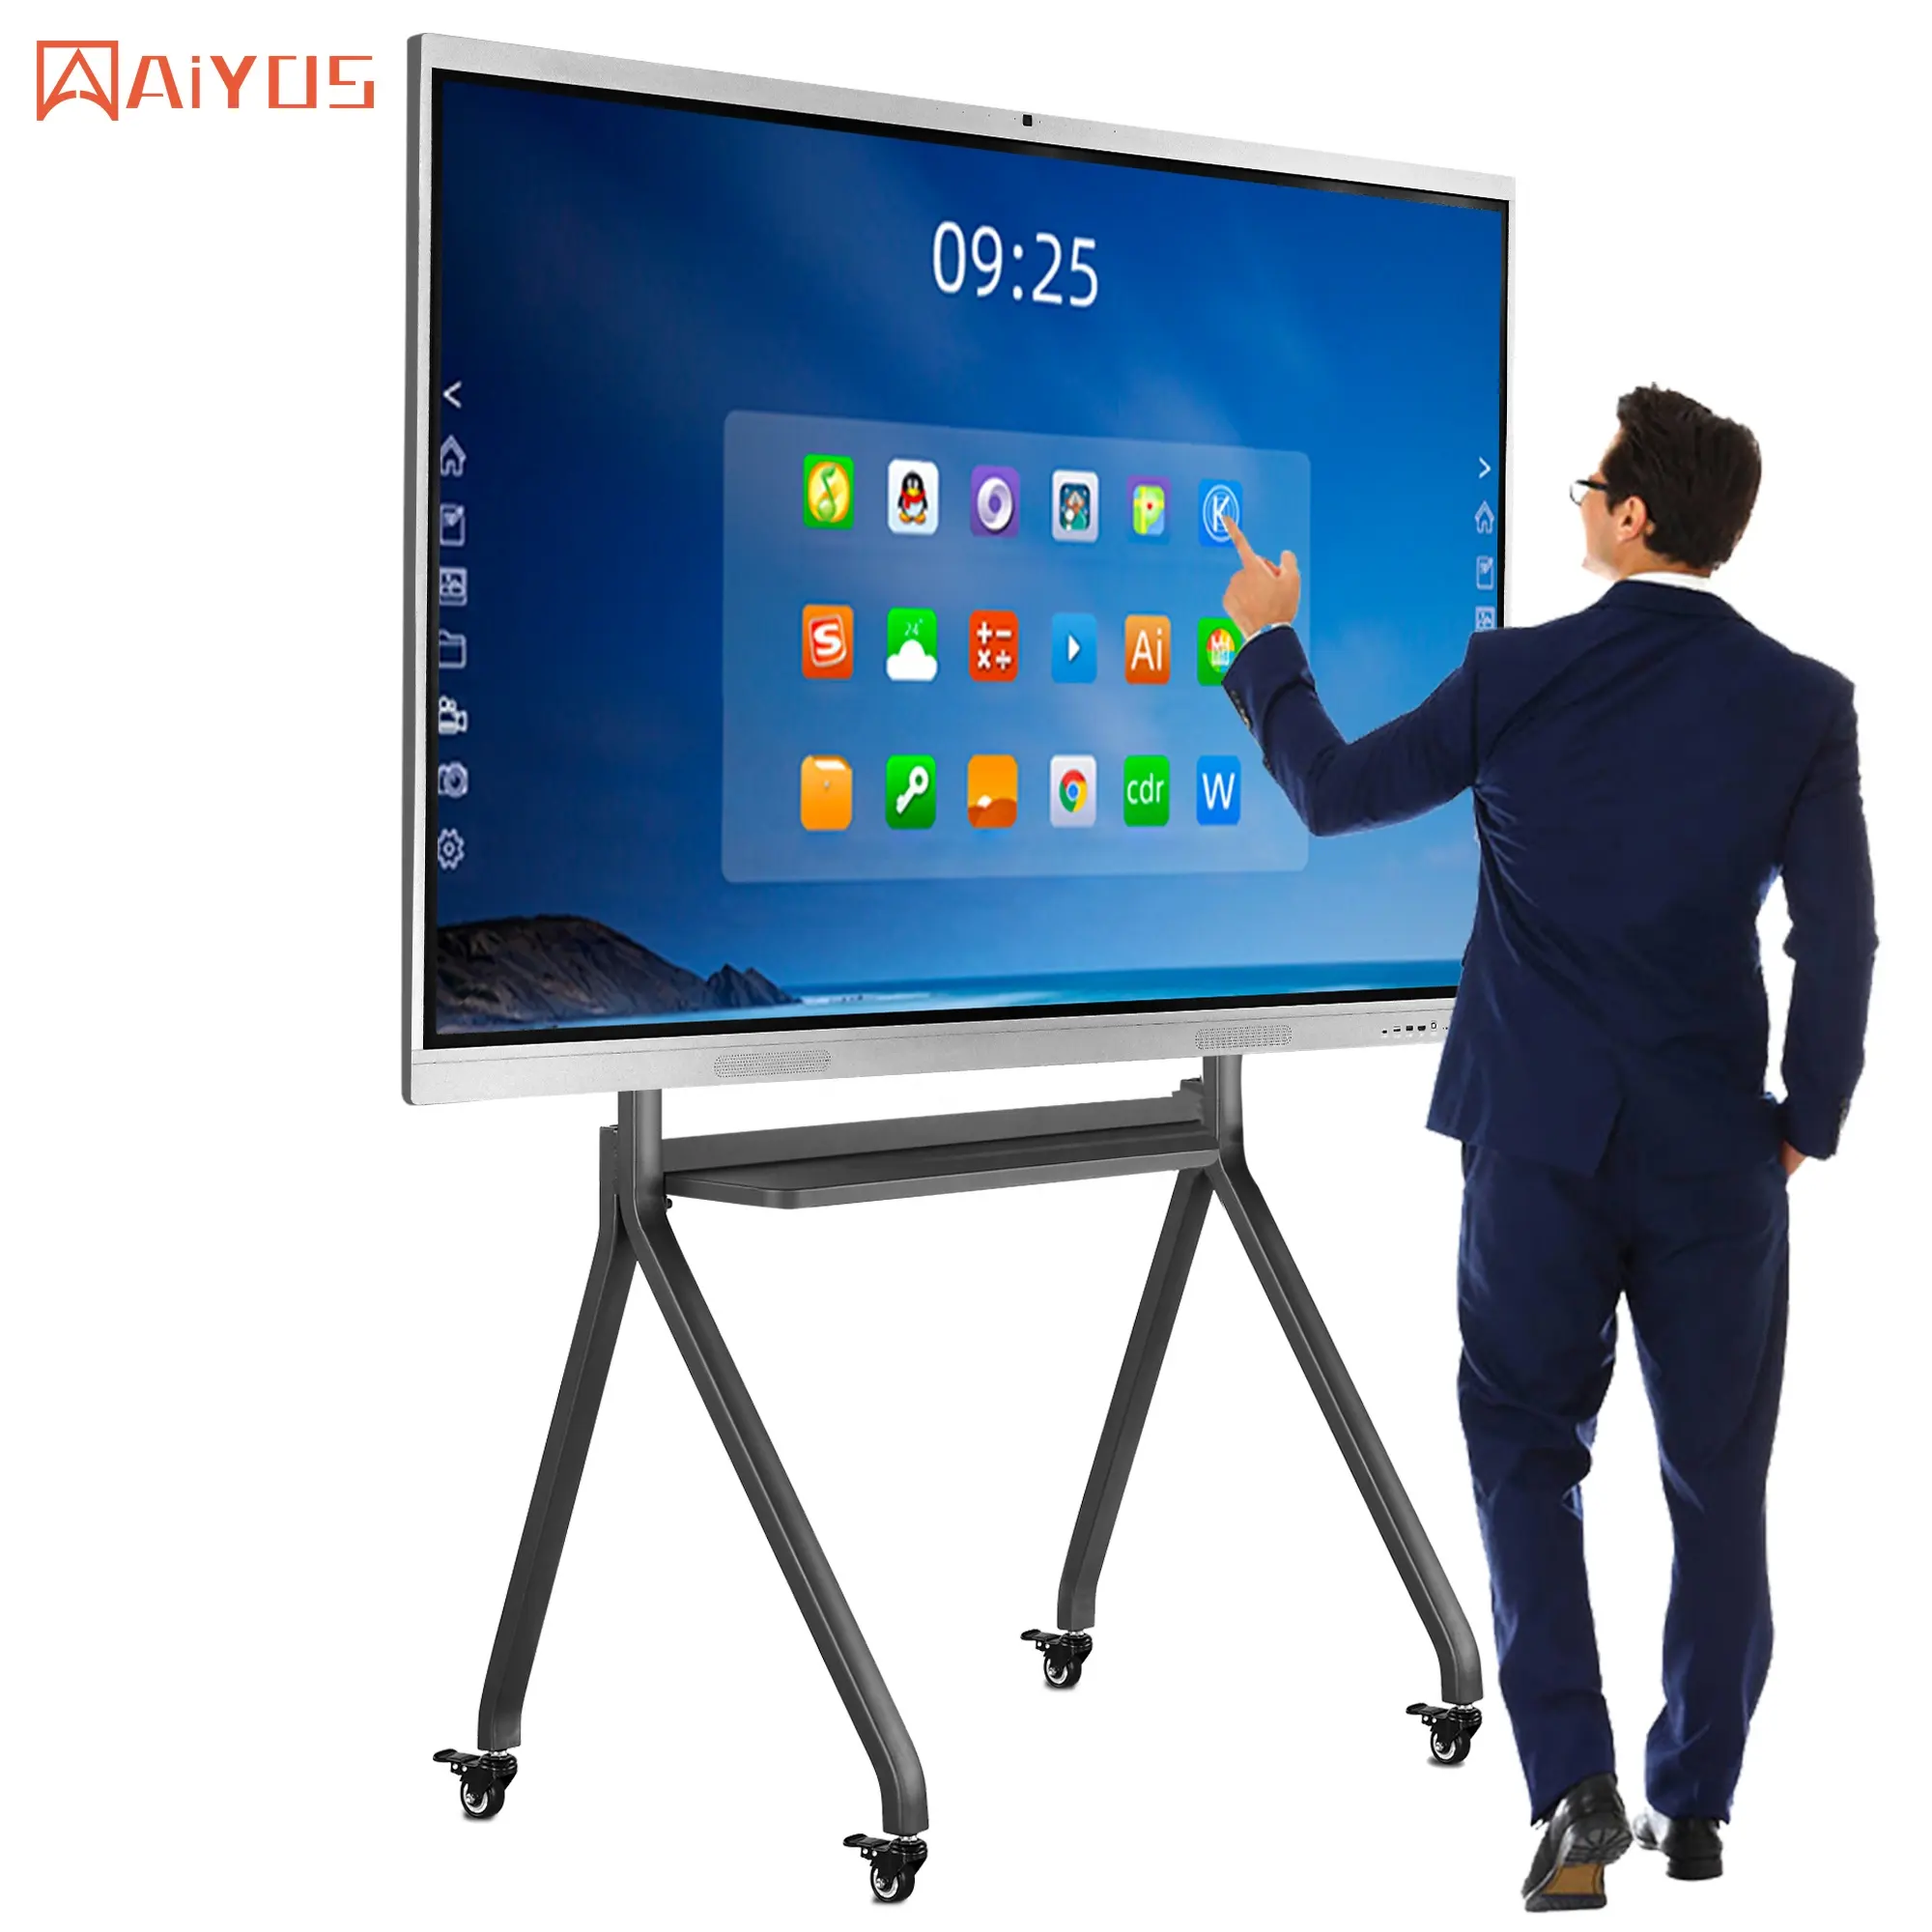 AIYOS 65 inch floor stand multi-touch school interactive whiteboard teaching touch screen 4K UHD for meeting